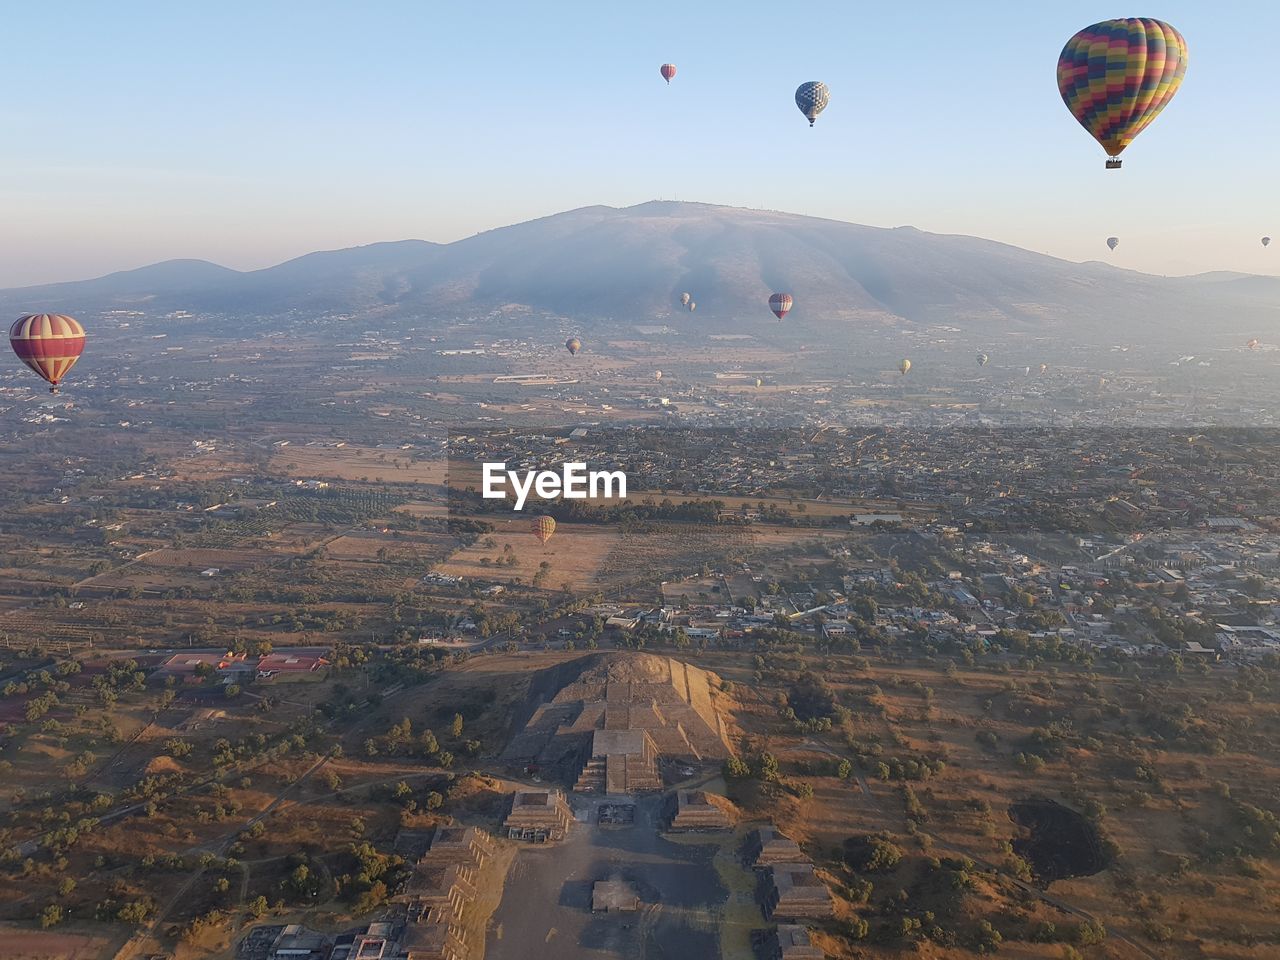 Aerial view of hot air balloons flying over landscape